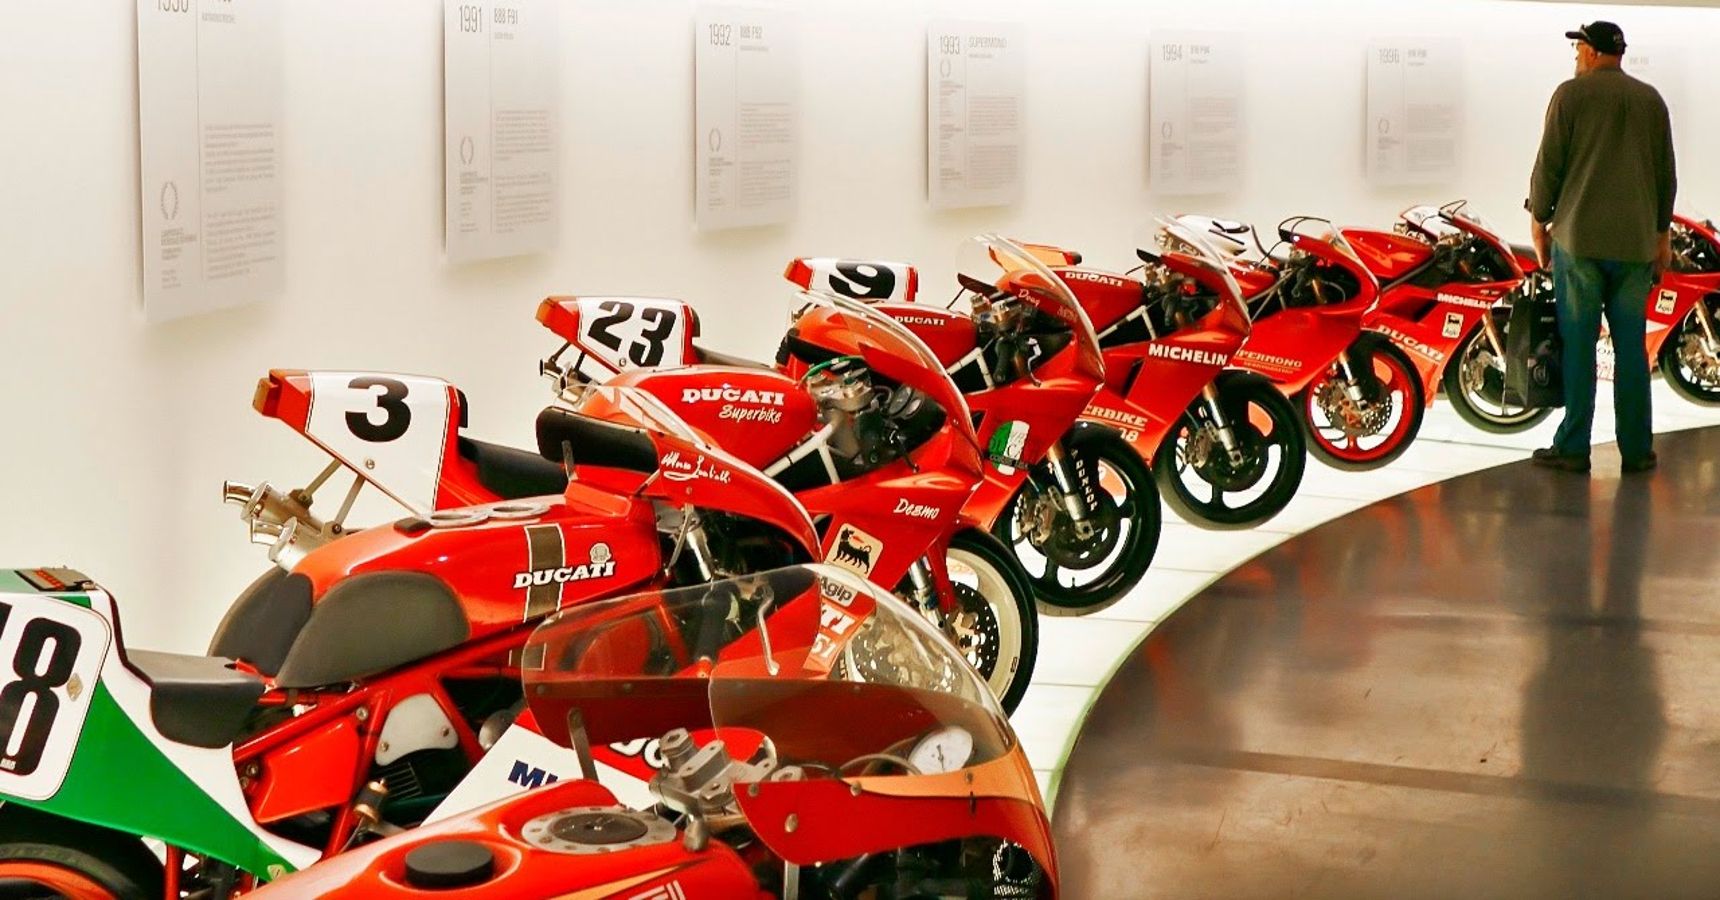 Ducati Museum And Factory Tours Reopen FullTime To InPerson Visitors